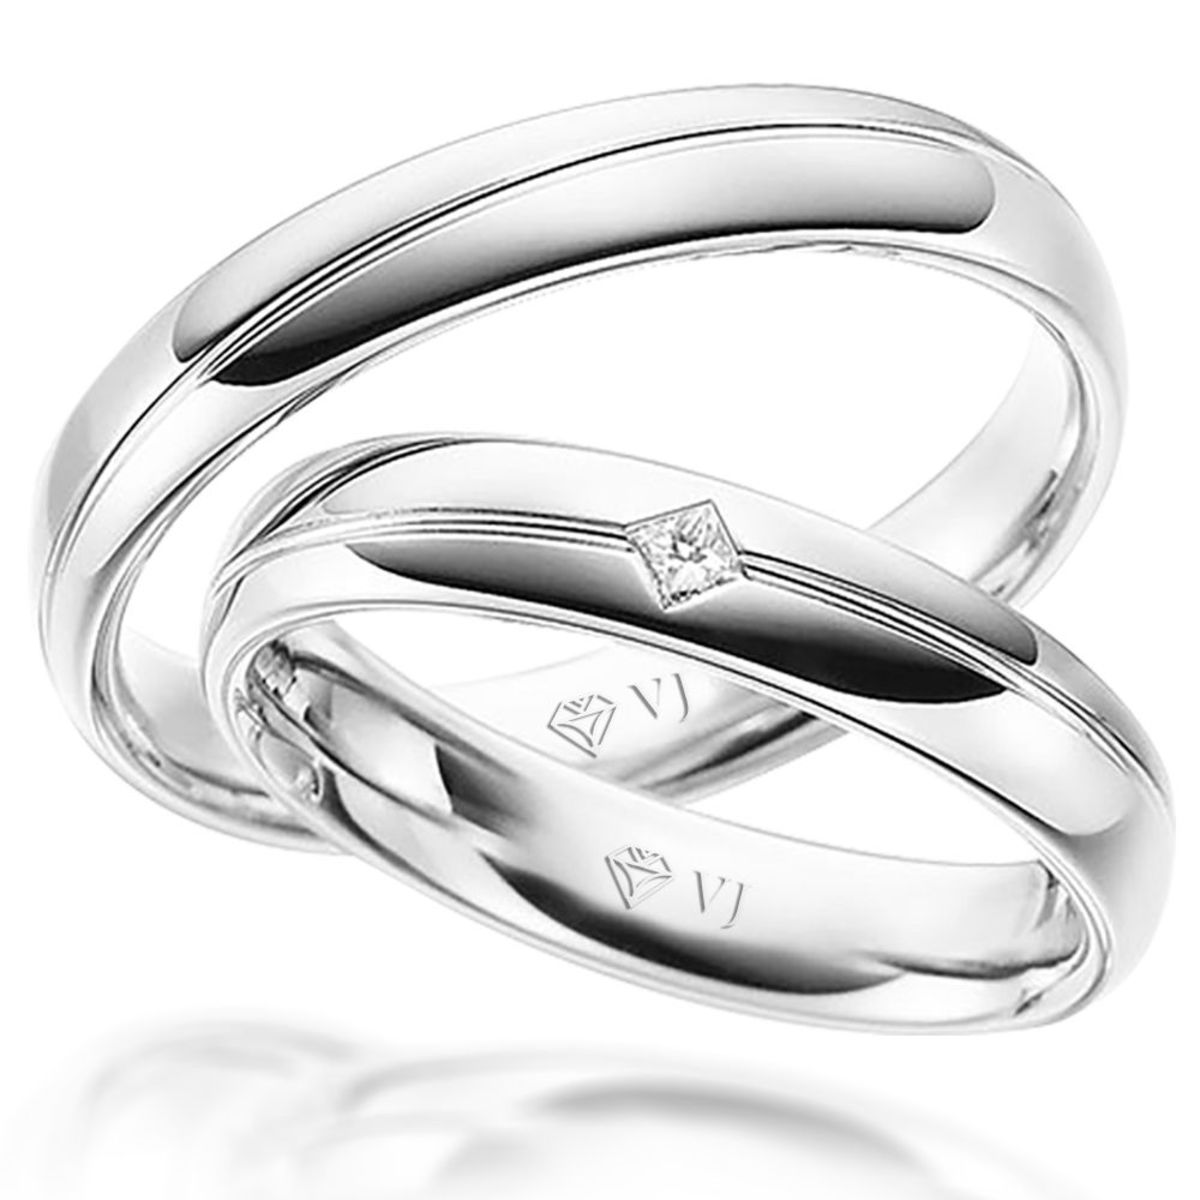 White gold has the beauty of pure silver without any tarnish